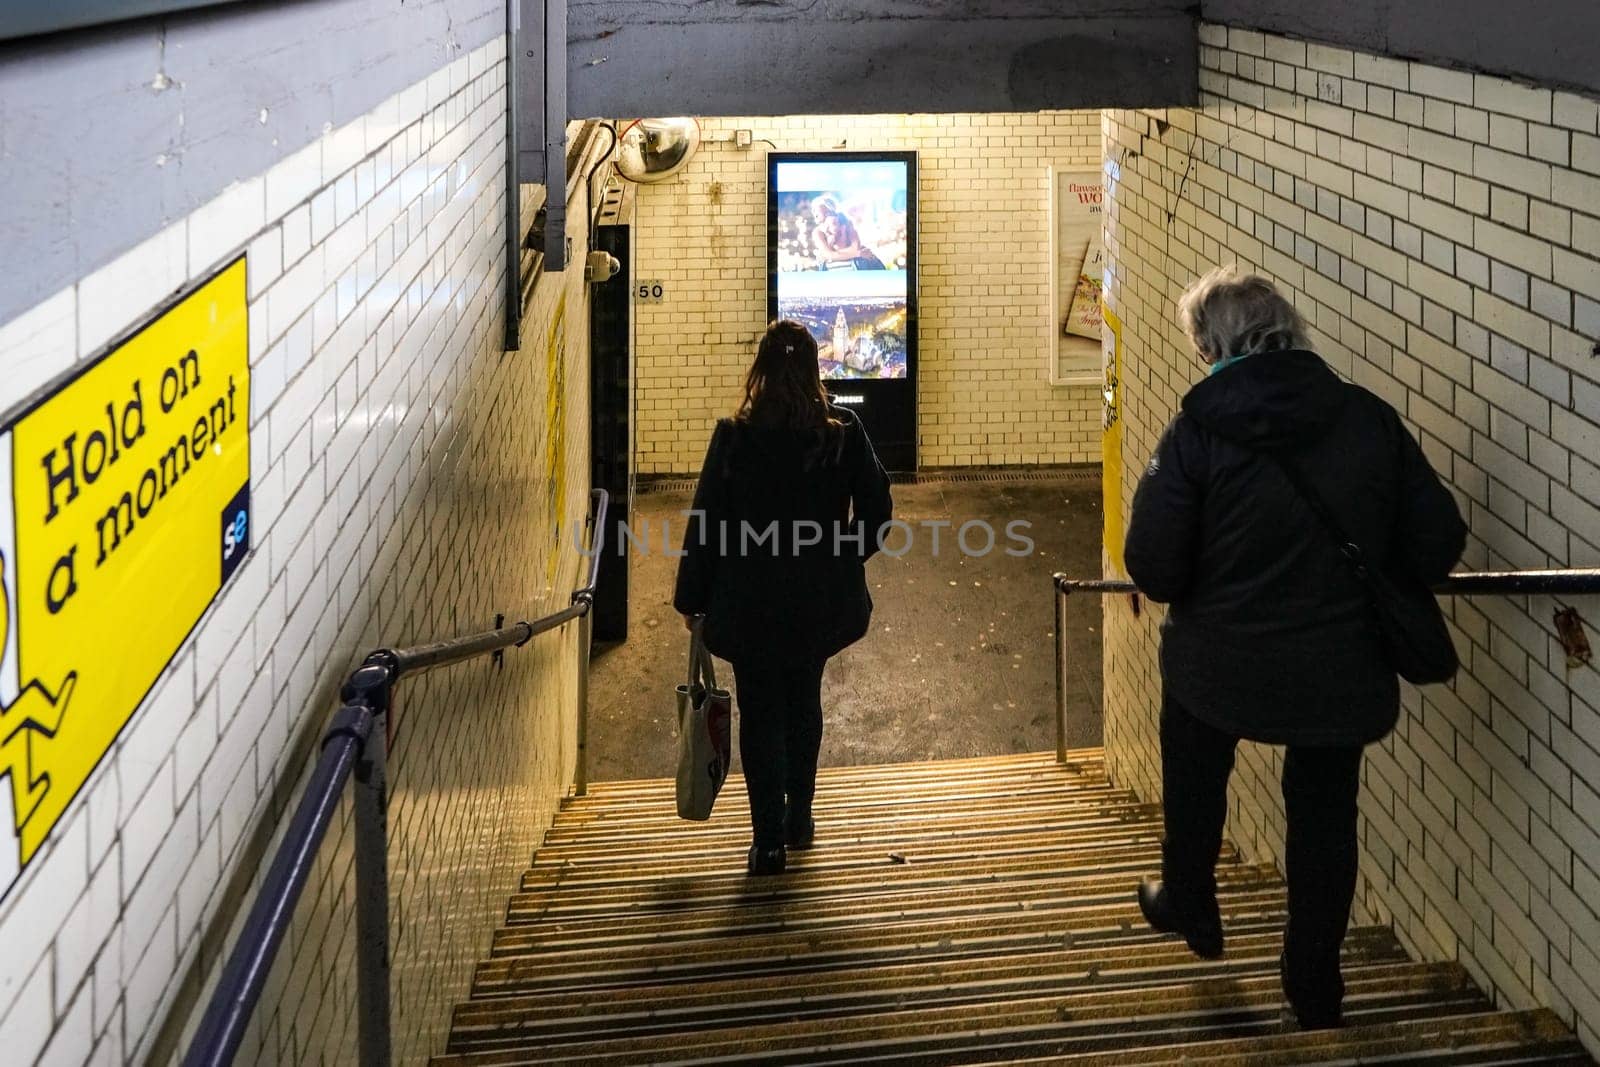 London, United Kingdom - February 01, 2019: Passengers walking down the stairs at pedestrian subway leading to other platform at Lewisham station.